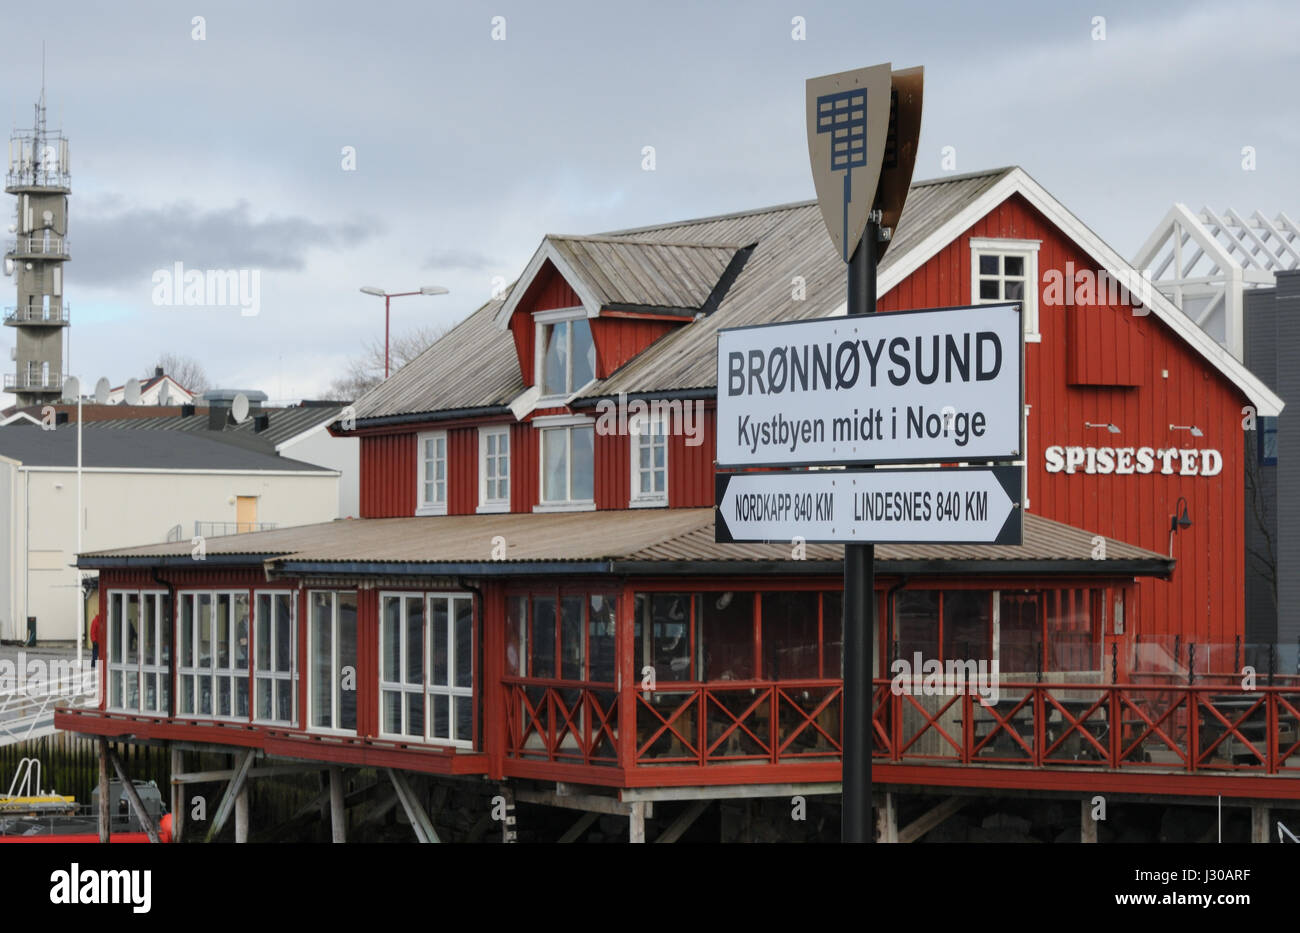 Sign saying that  Bronnoysund is in the middle of Norway ‘Kystbyen midt i Norge’, The coastal city in the middle of Norway Stock Photo